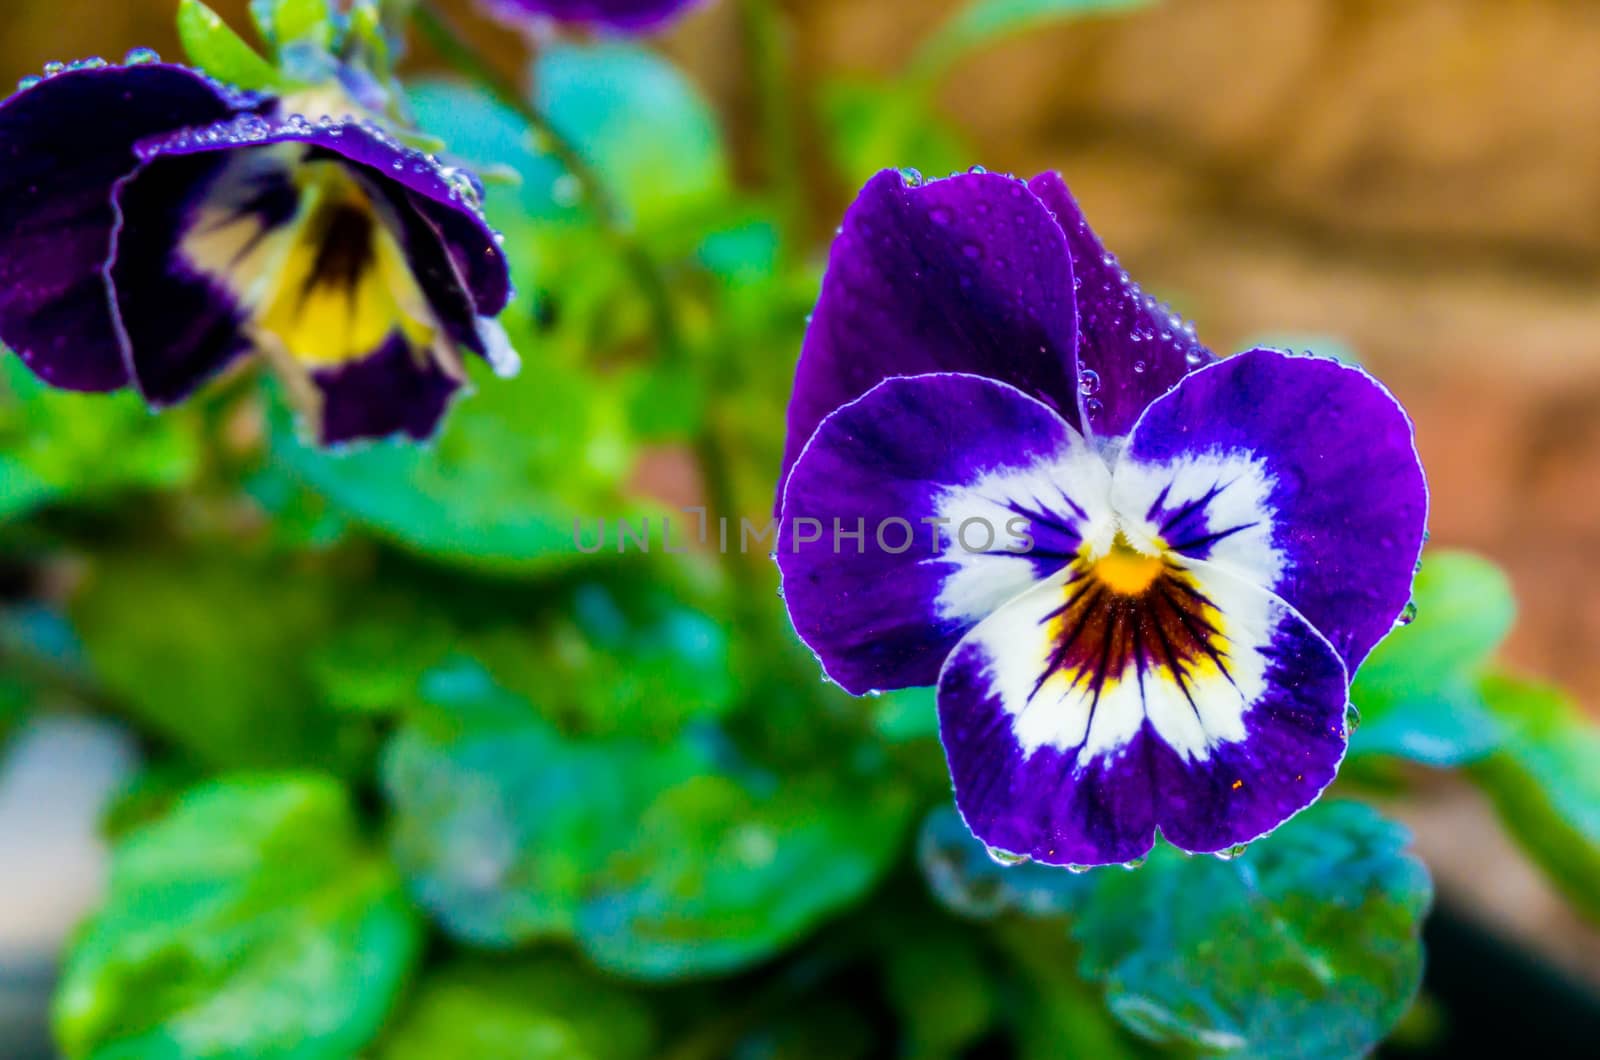 wet violet garden pansy flower covered in raindrops giving a beautiful effect macro close up nature background